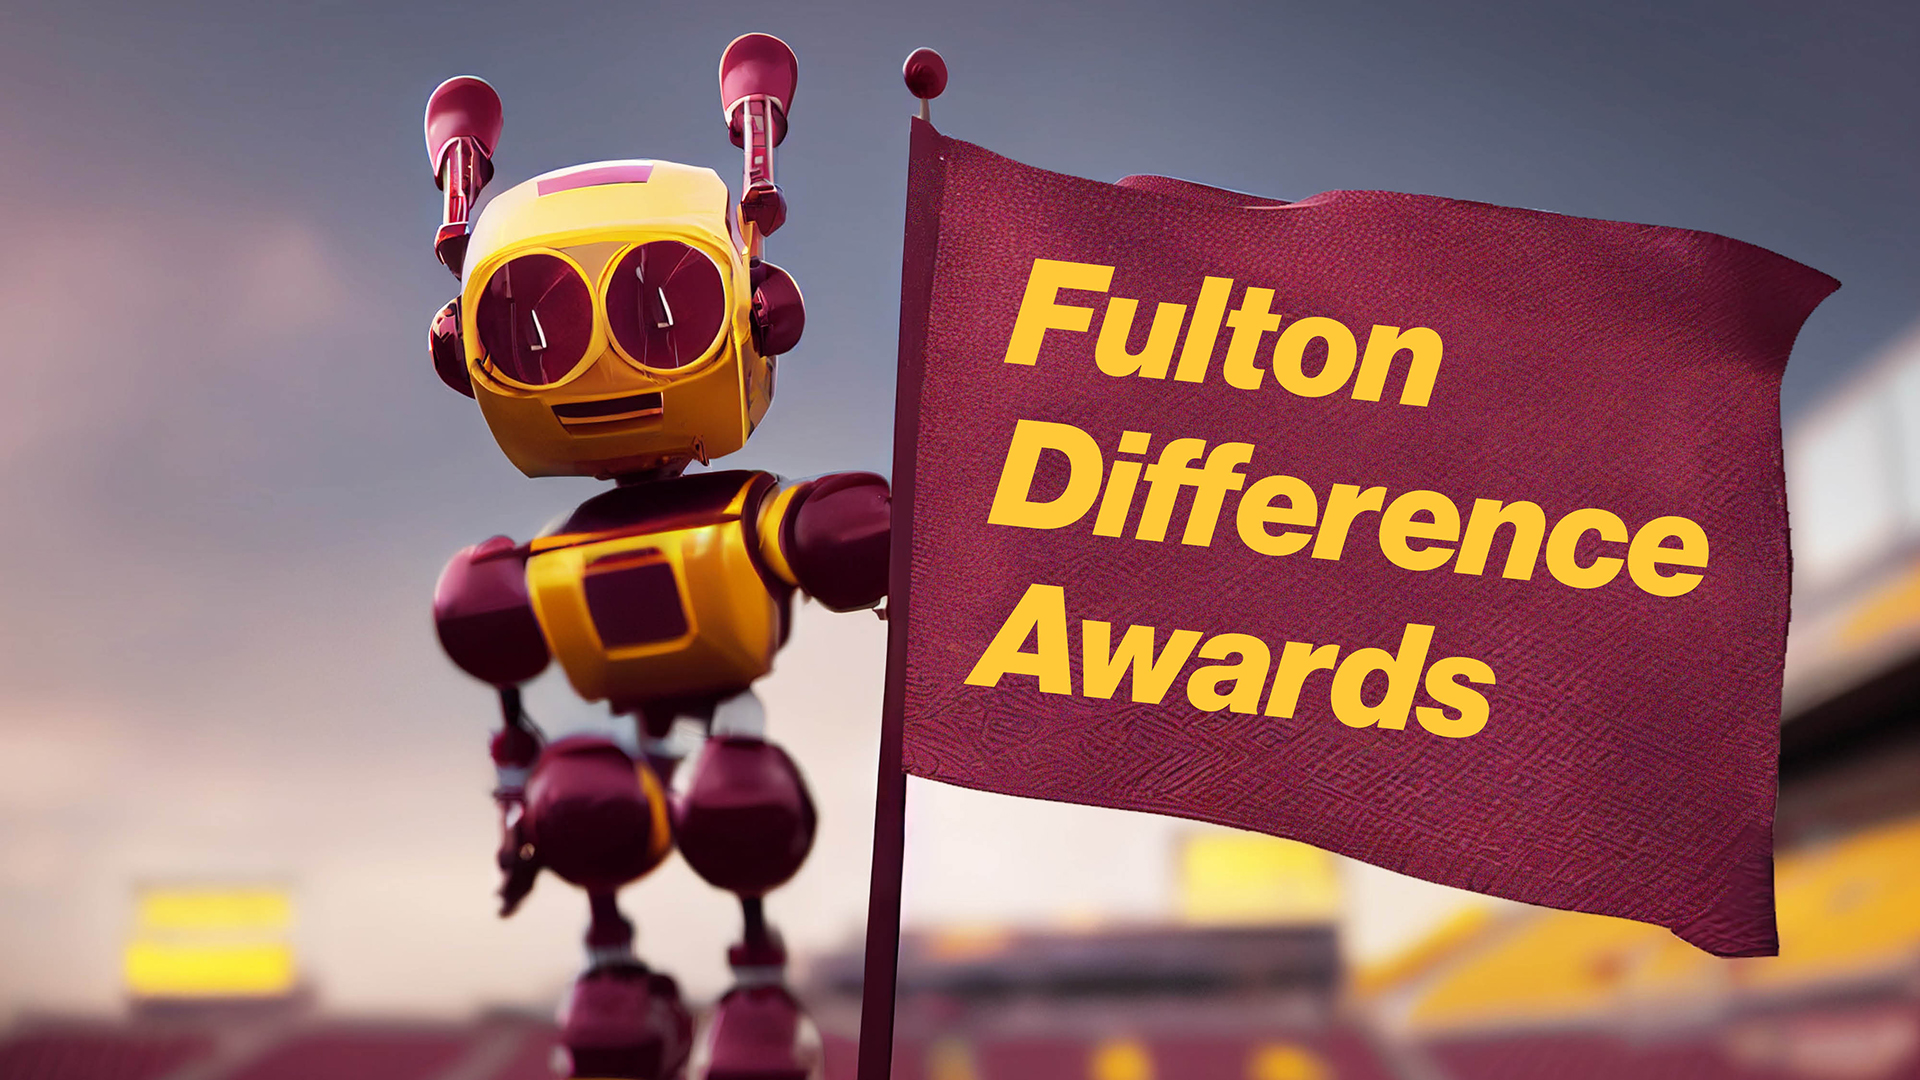 Fulton Difference Awards